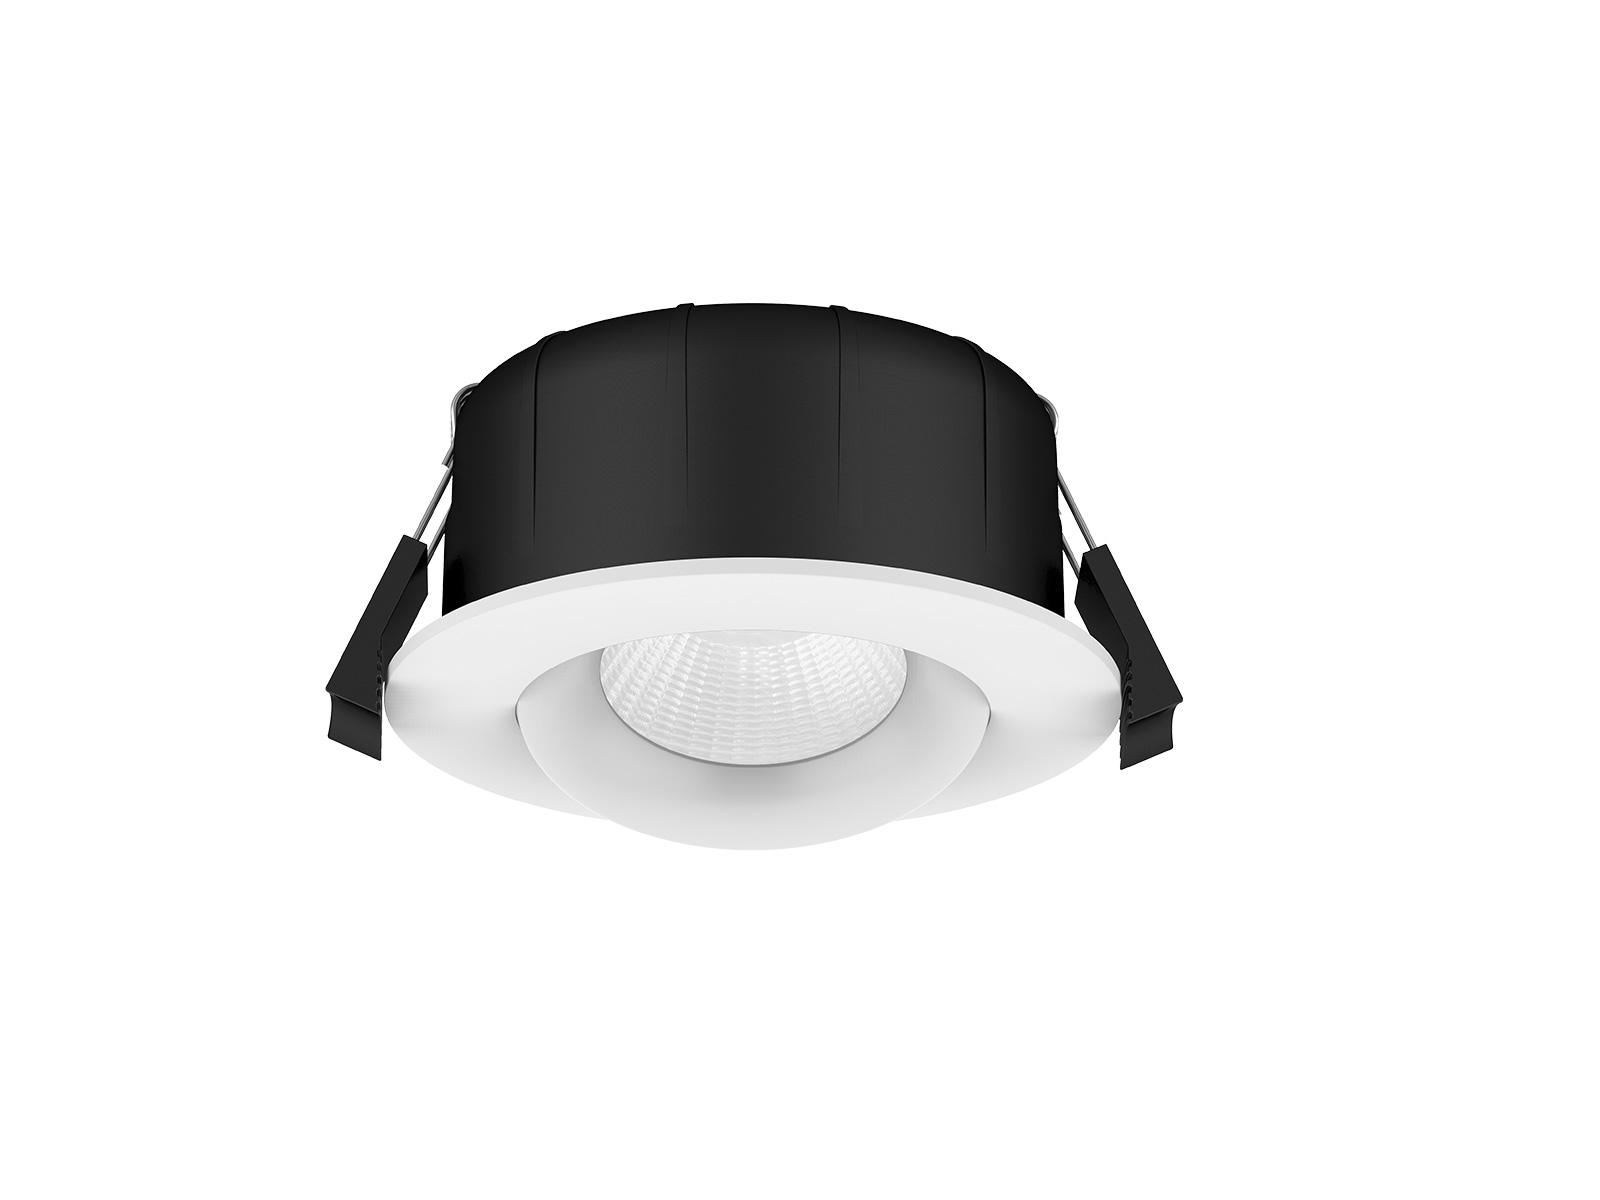 CL140 Air tight design tilted led downlight